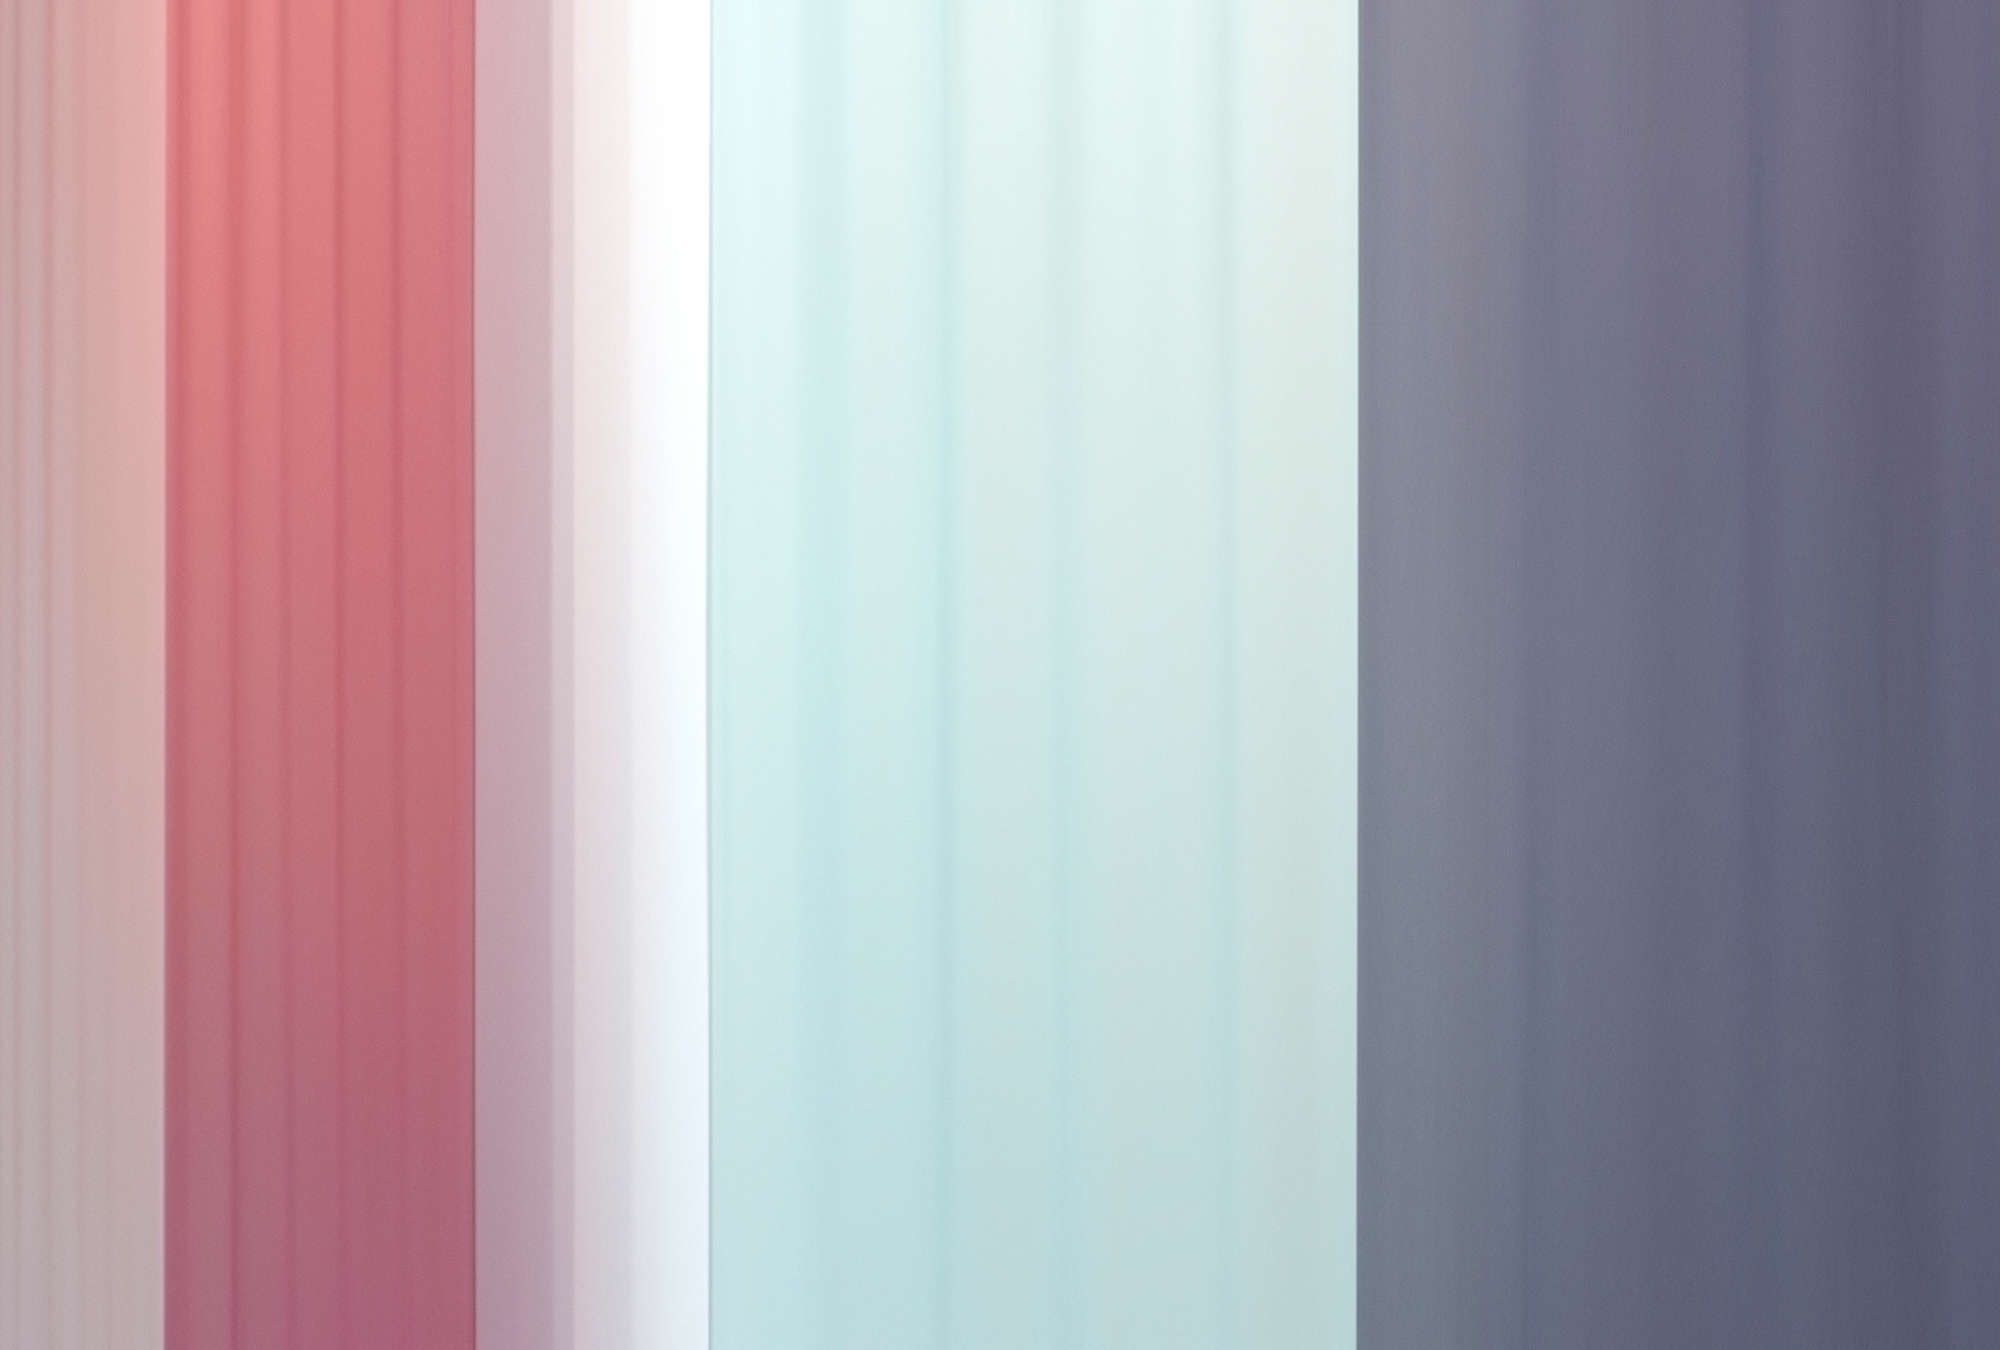             Photo wallpaper »co-coloures 2« - Colour gradient with stripes - Pink, light blue dark blue | Smooth, slightly shiny premium non-woven fabric
        